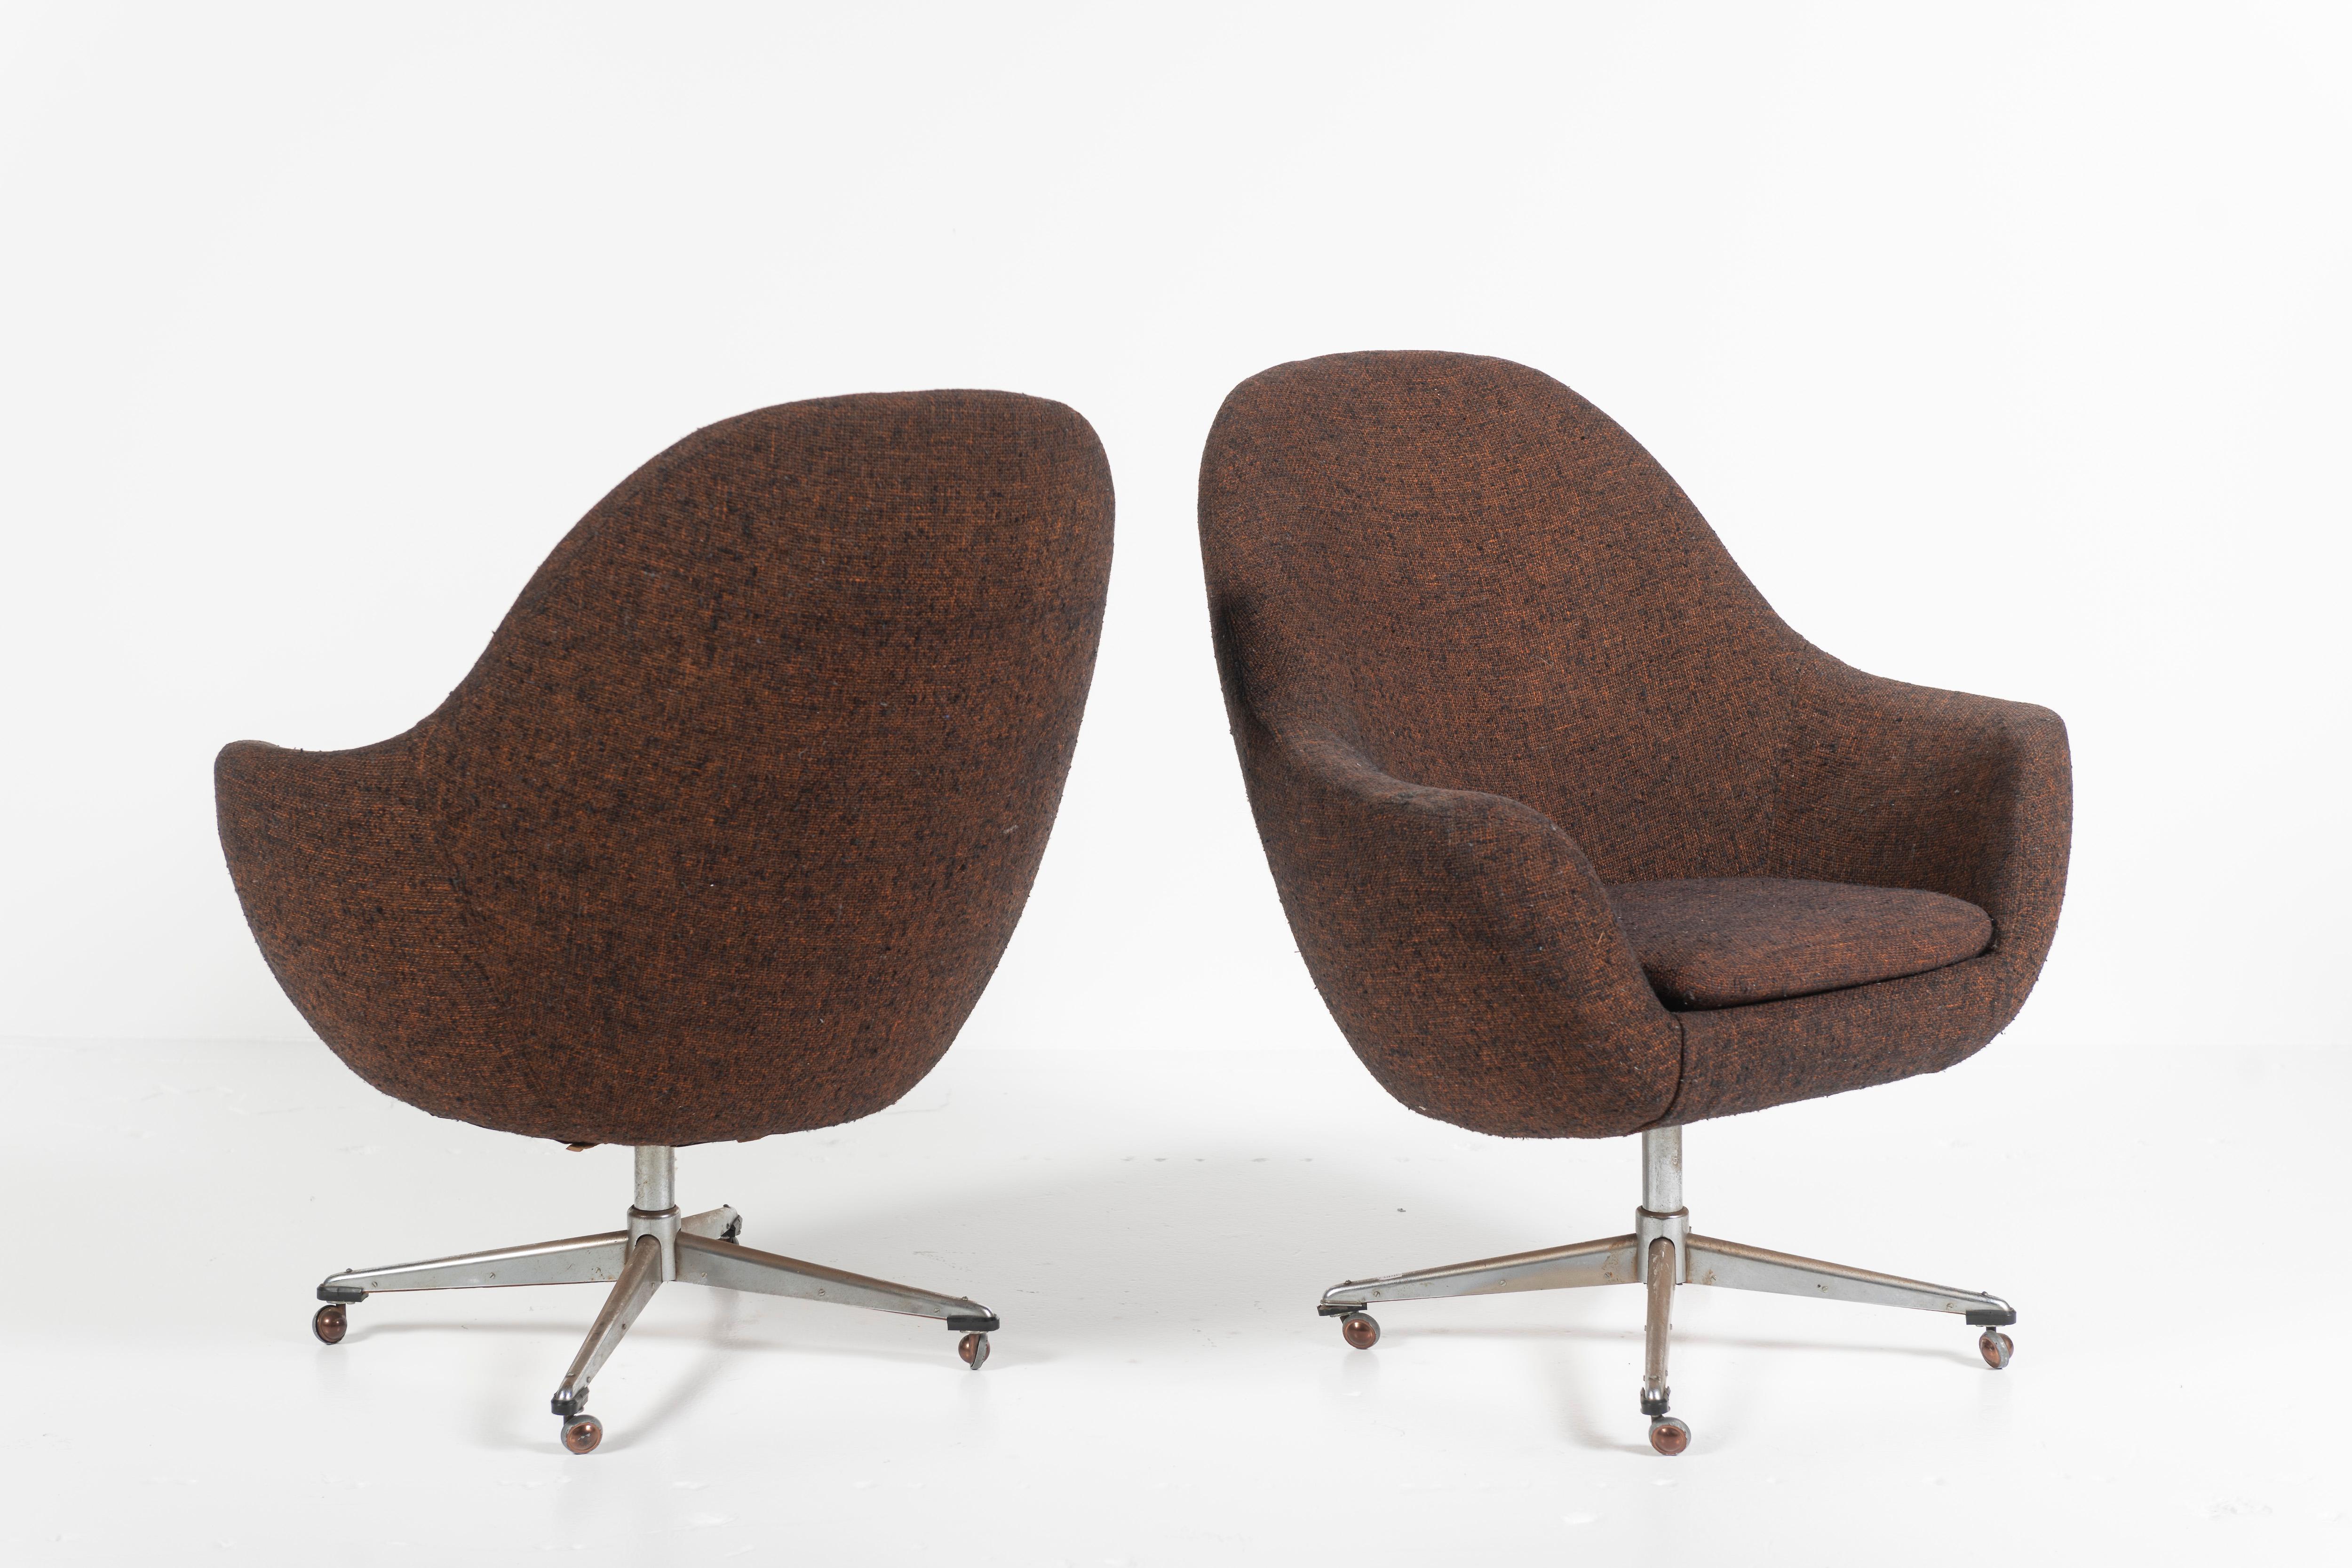 Pair of Mid-Century Modern Wool Overman Swivel Chairs, with Casters, Sweden 1960 In Good Condition For Sale In San Francisco, CA